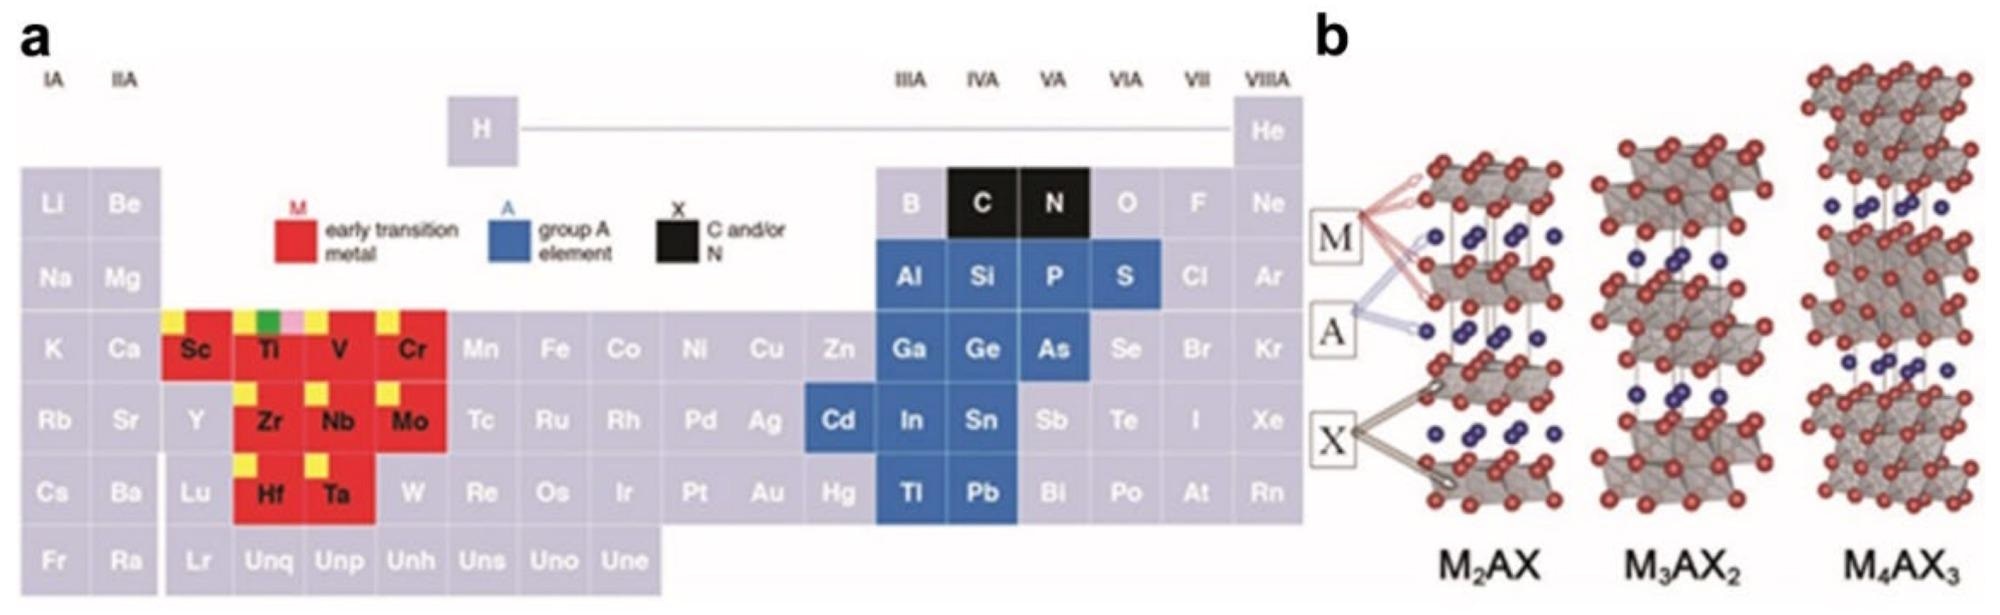 (a) The elements of the periodic table for MAX phases. (b) Structures of M2AX, M3AX2, and M4AX3 phases [41].